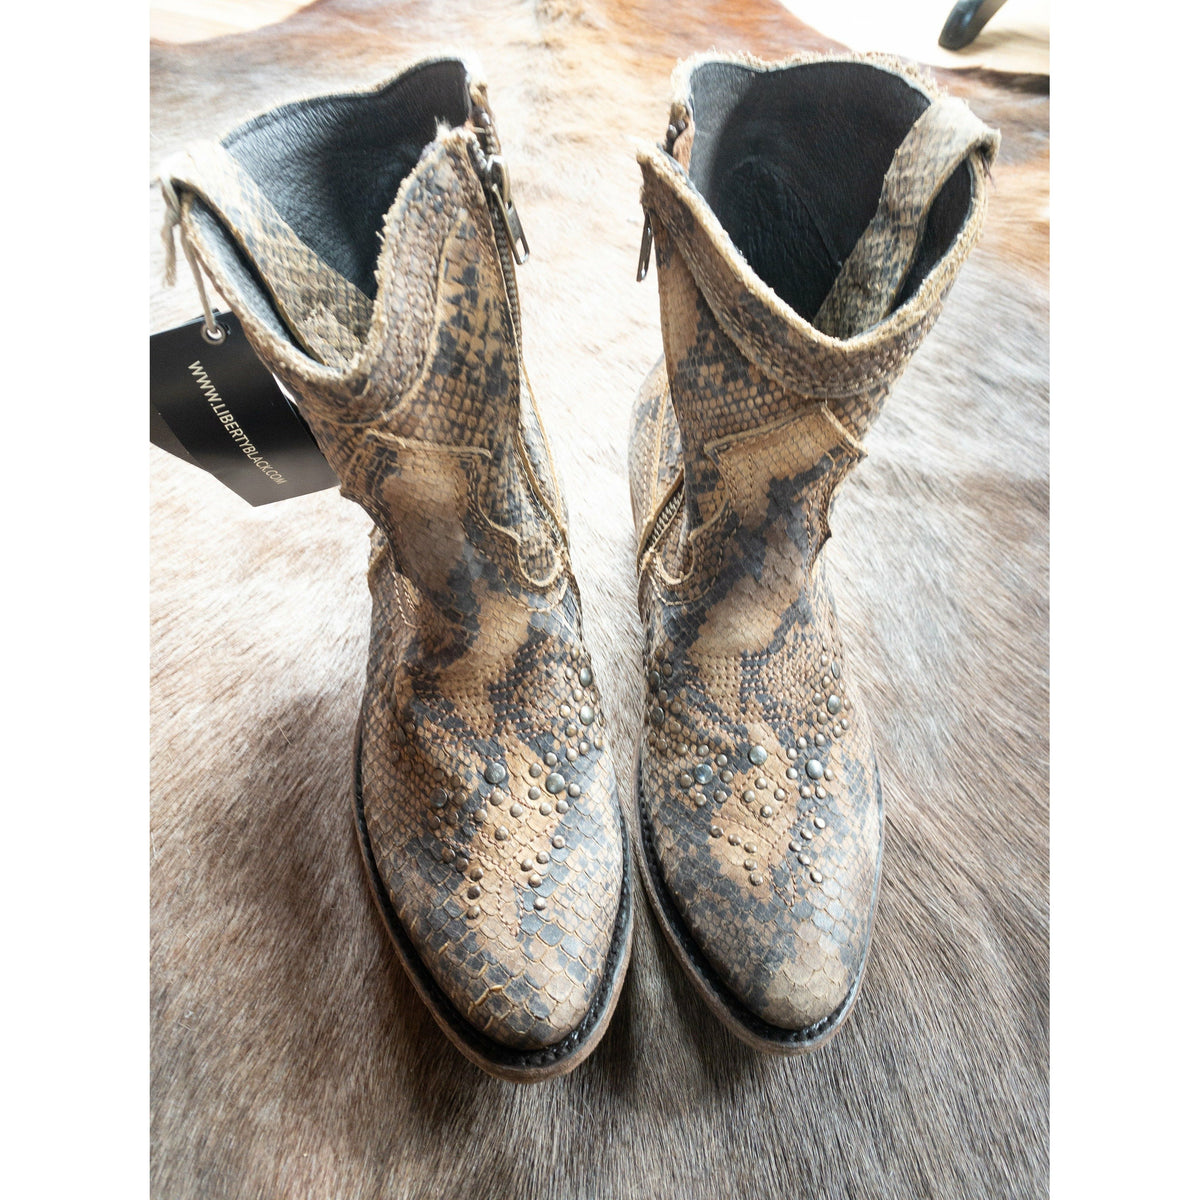 Liberty Black Python Printed Bootie-Boots-[Womens_Boutique]-[NFR]-[Rodeo_Fashion]-[Western_Style]-Calamity's LLC